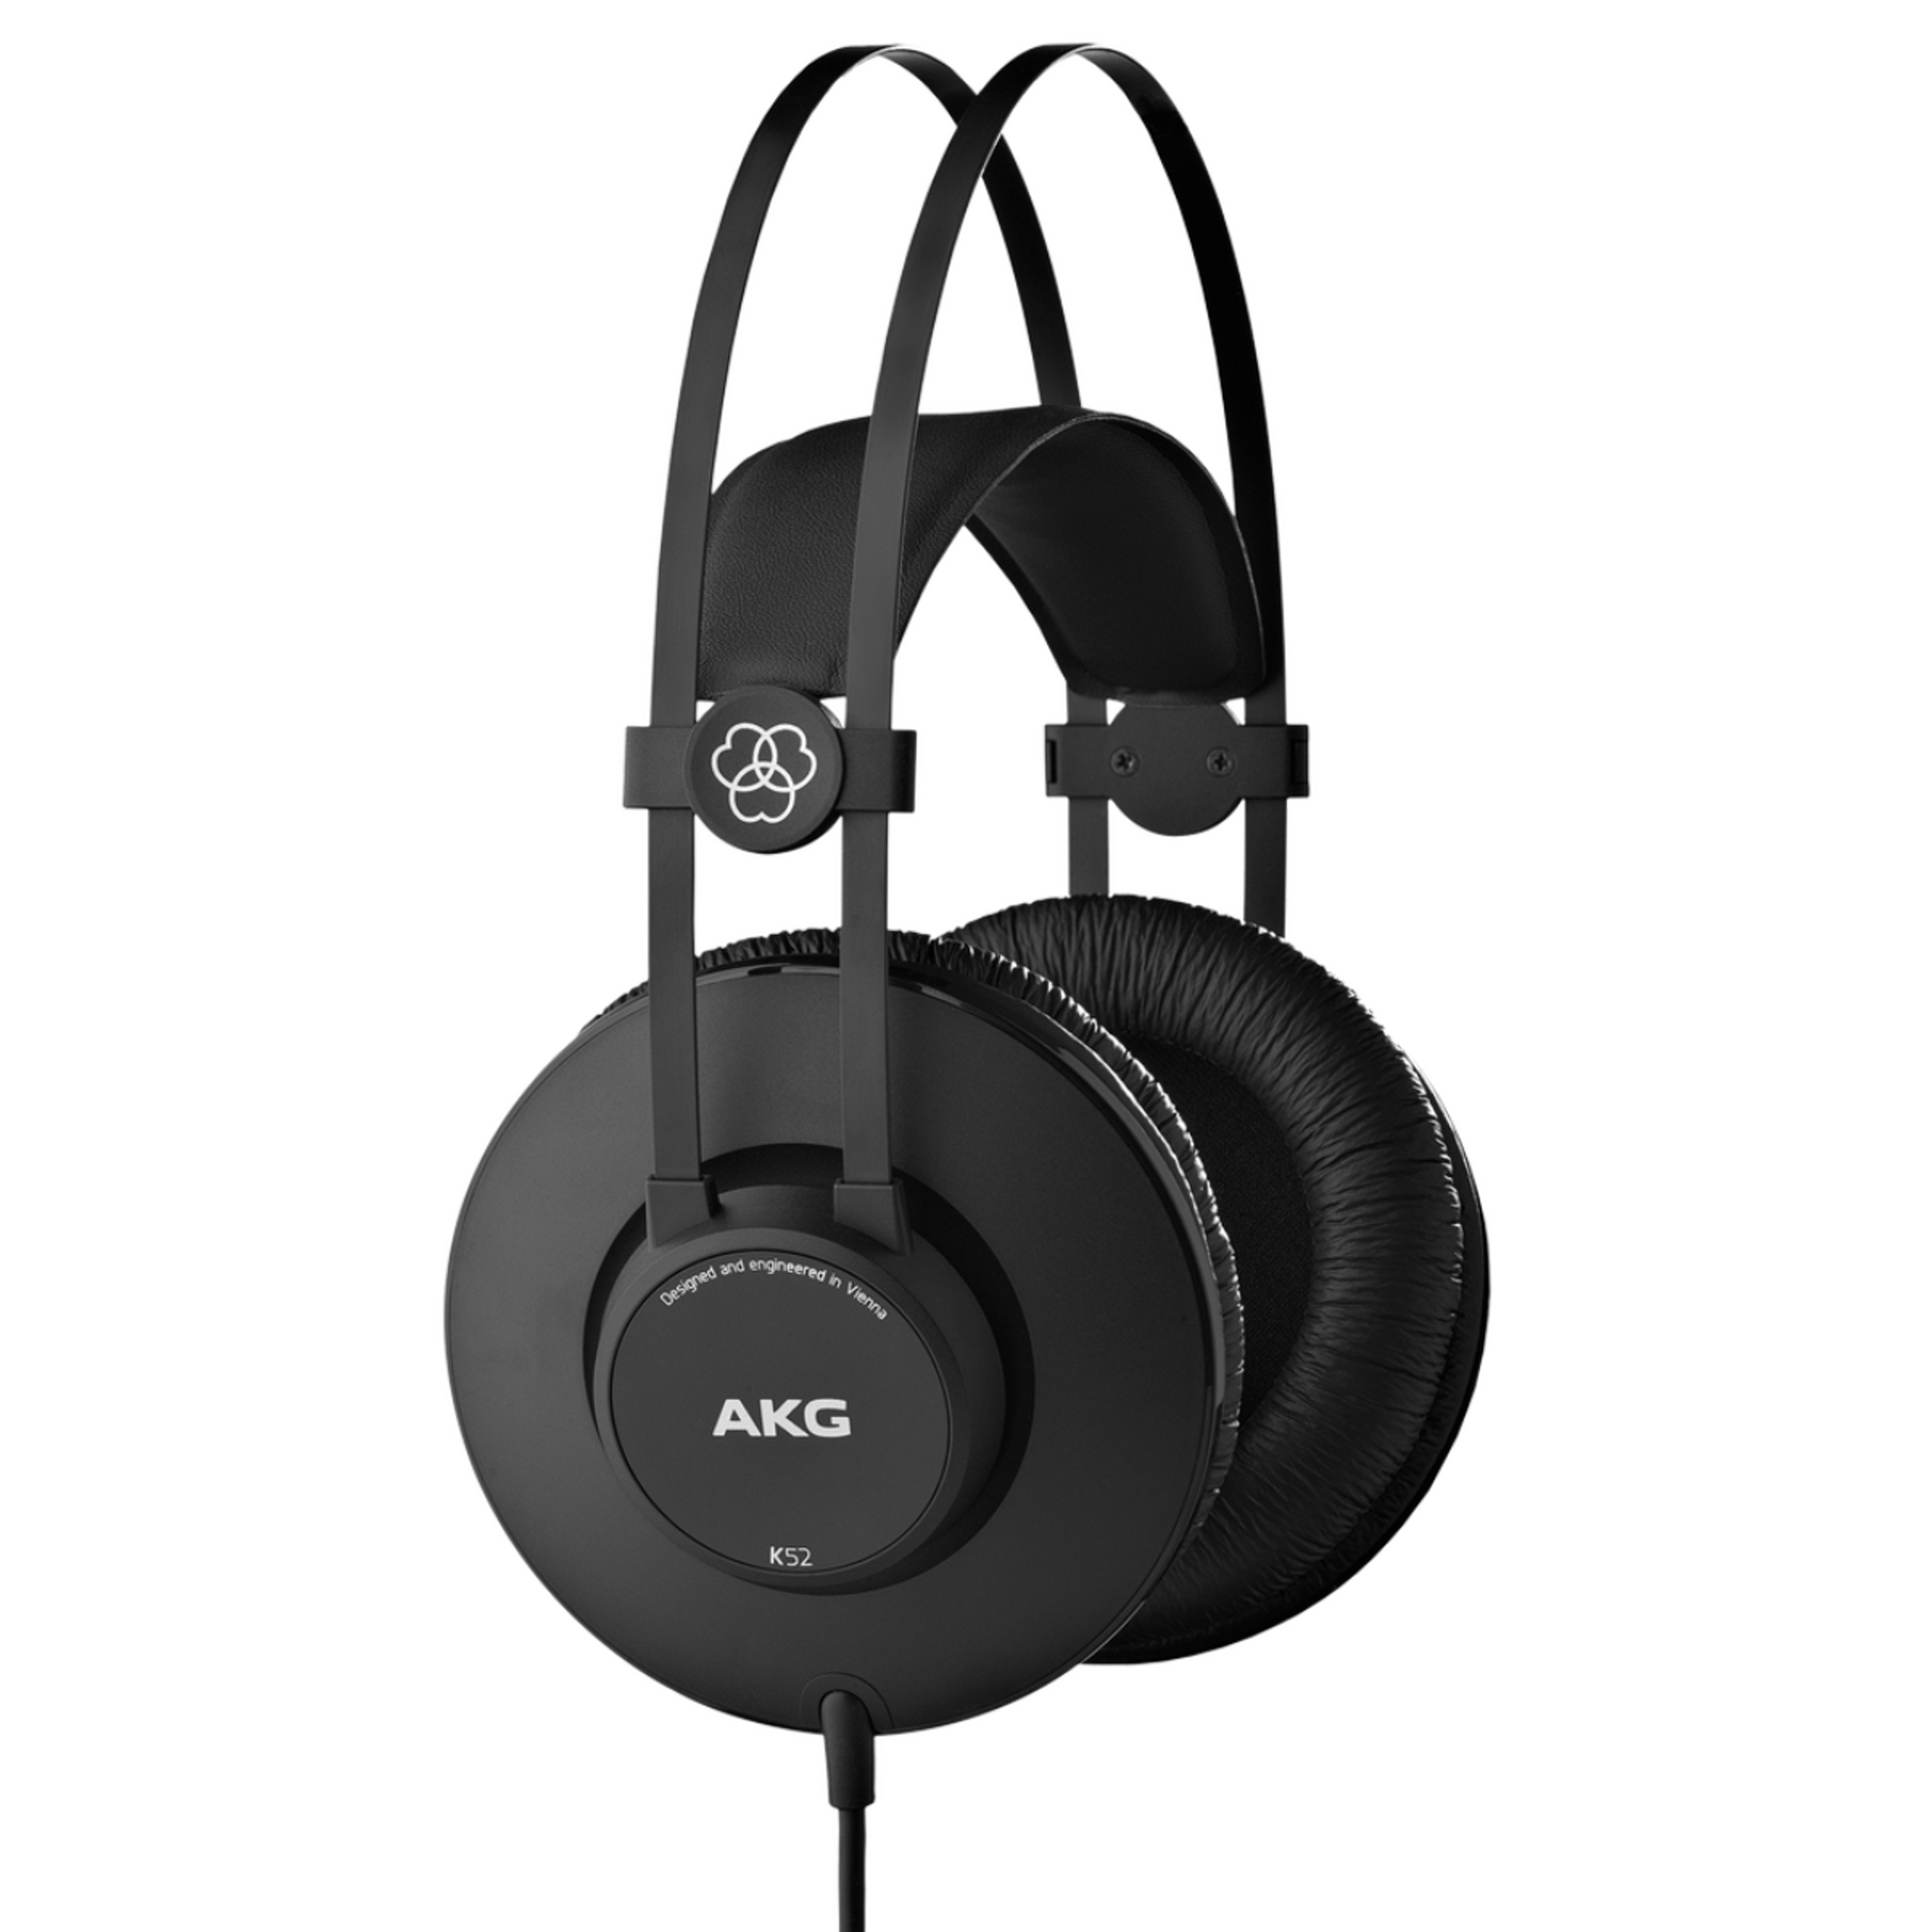 Our K52 headphones deliver authoritative, extended low-frequency response that gives definition to kick drums and bass guitars